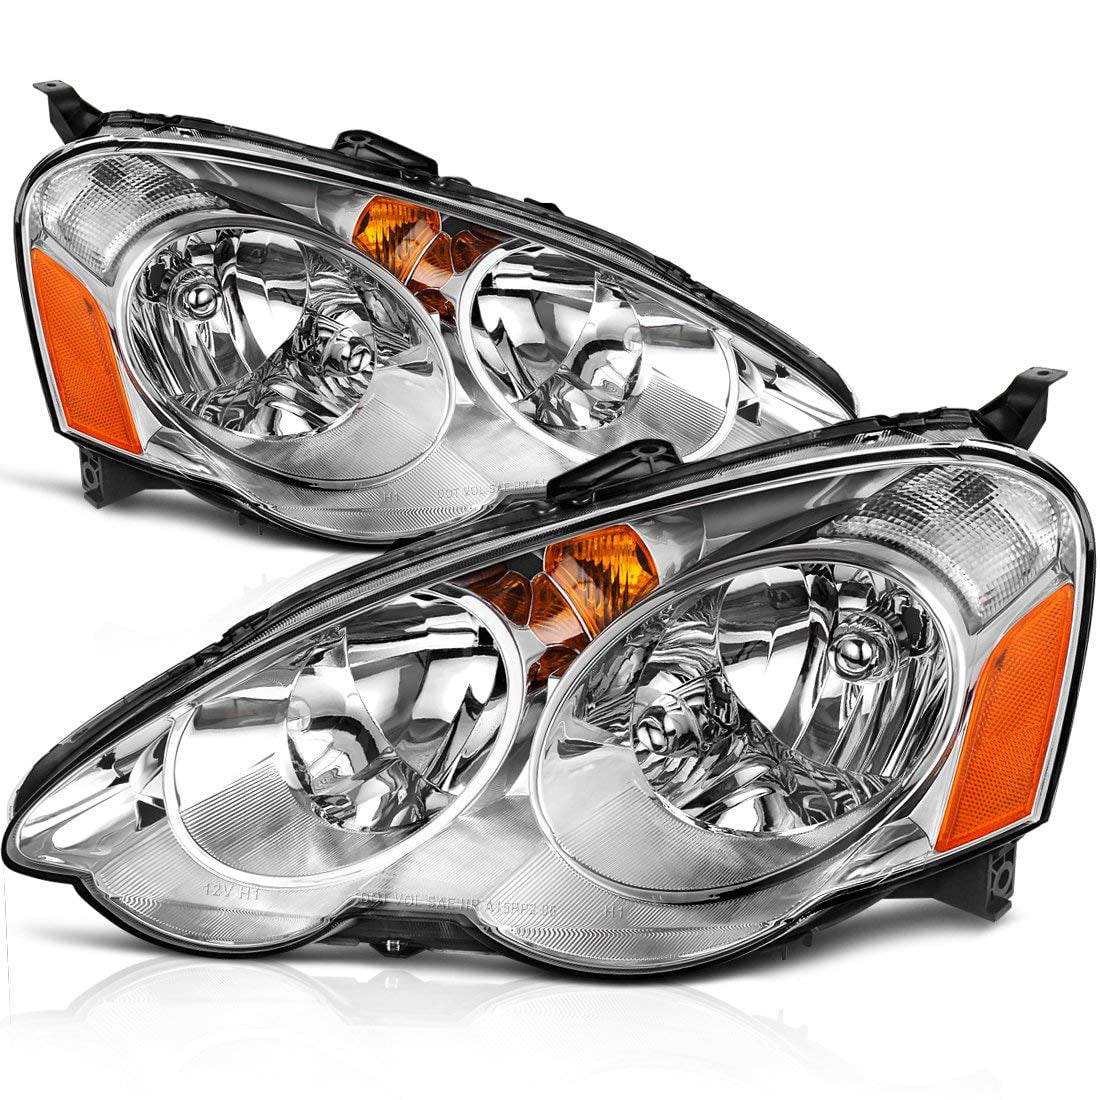 NEW FOR 2002 2003 2004 Acura RSX Complete Direct Replacement Headlight Set